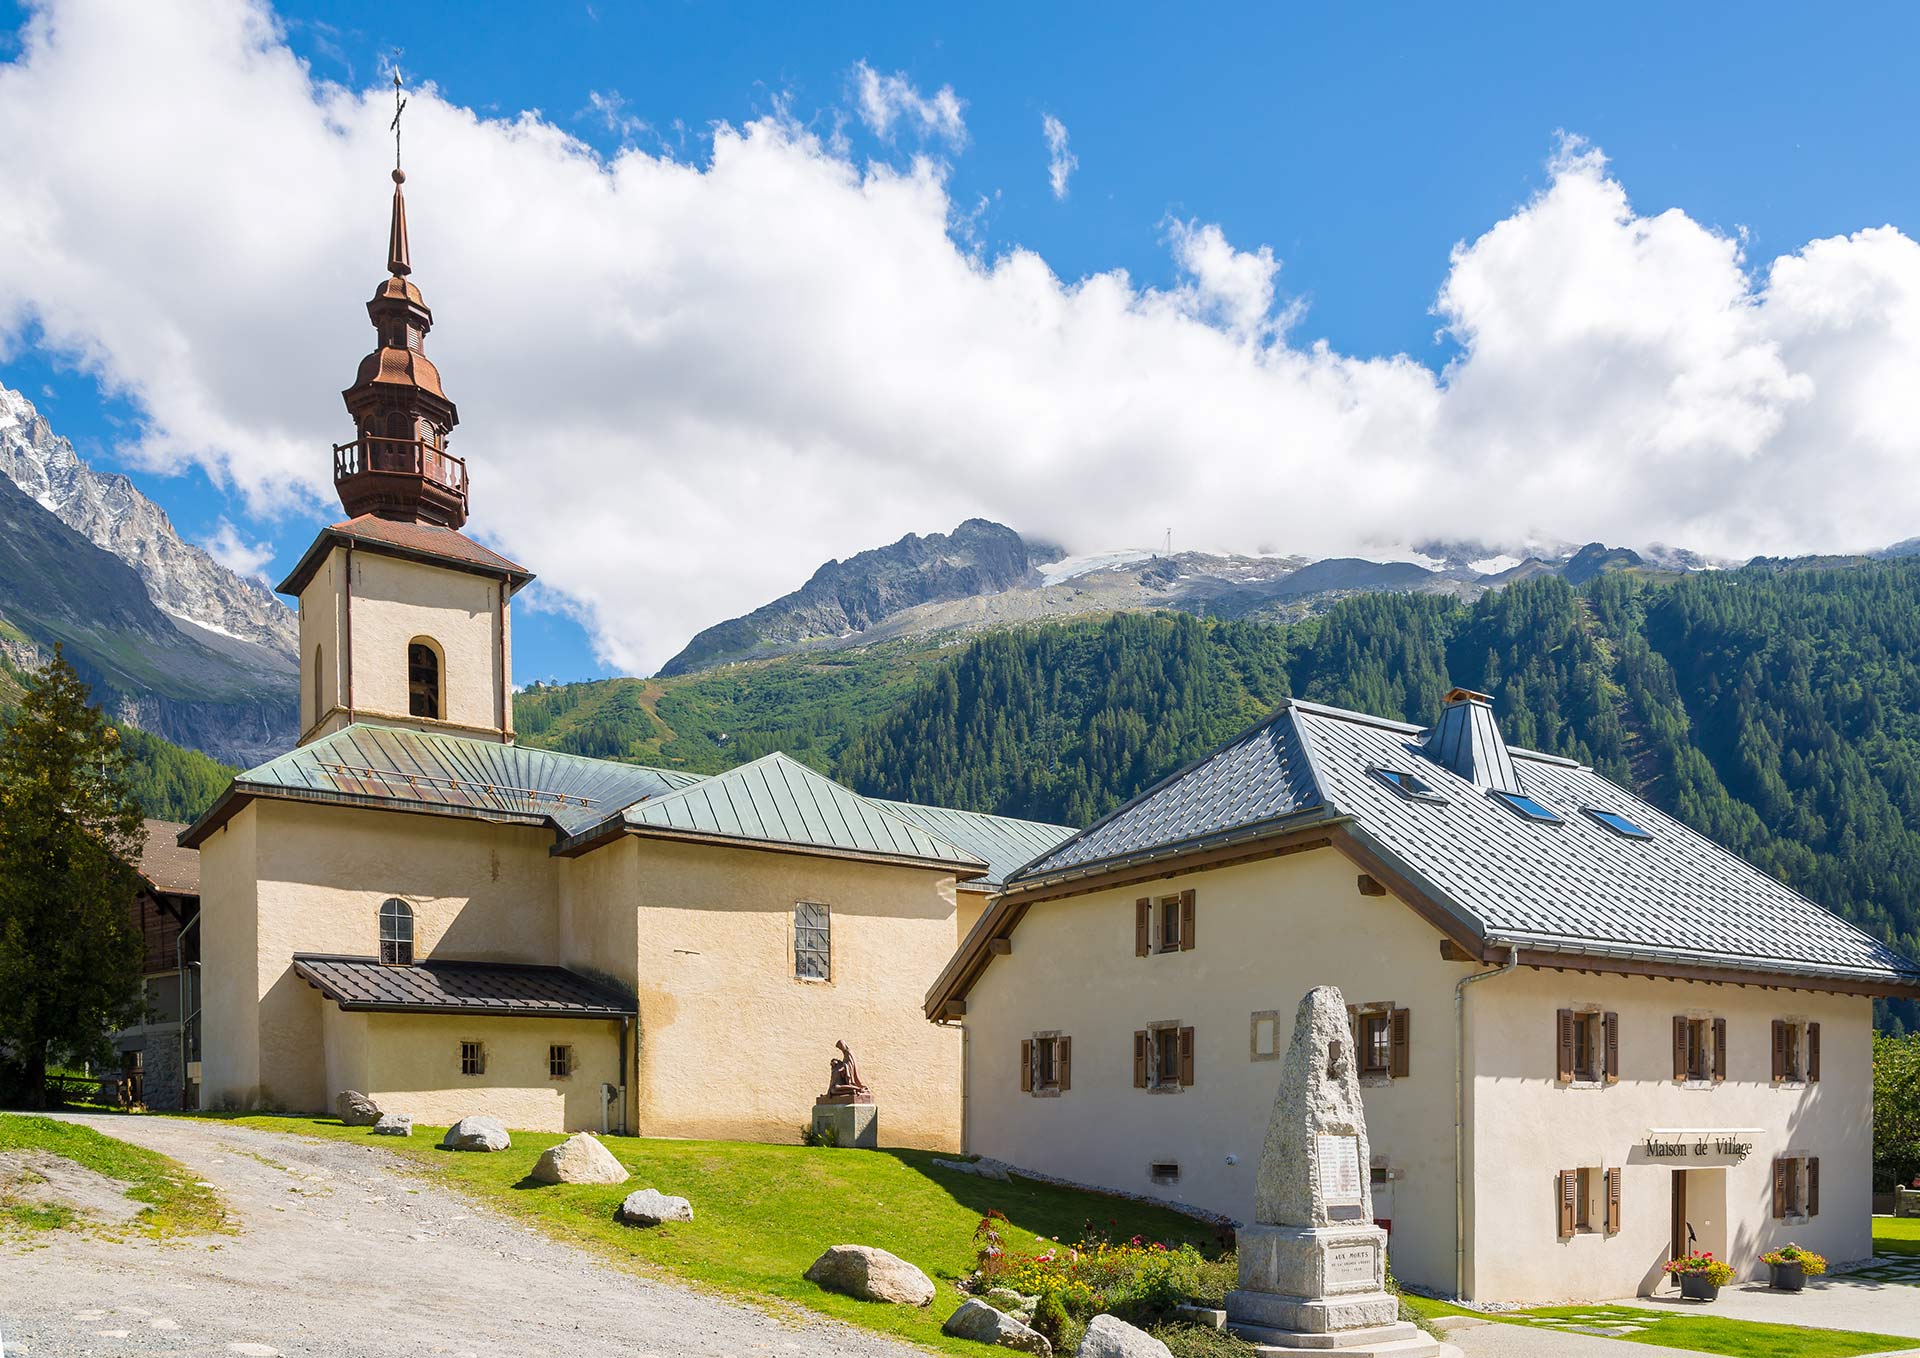 image of a church in argentiere